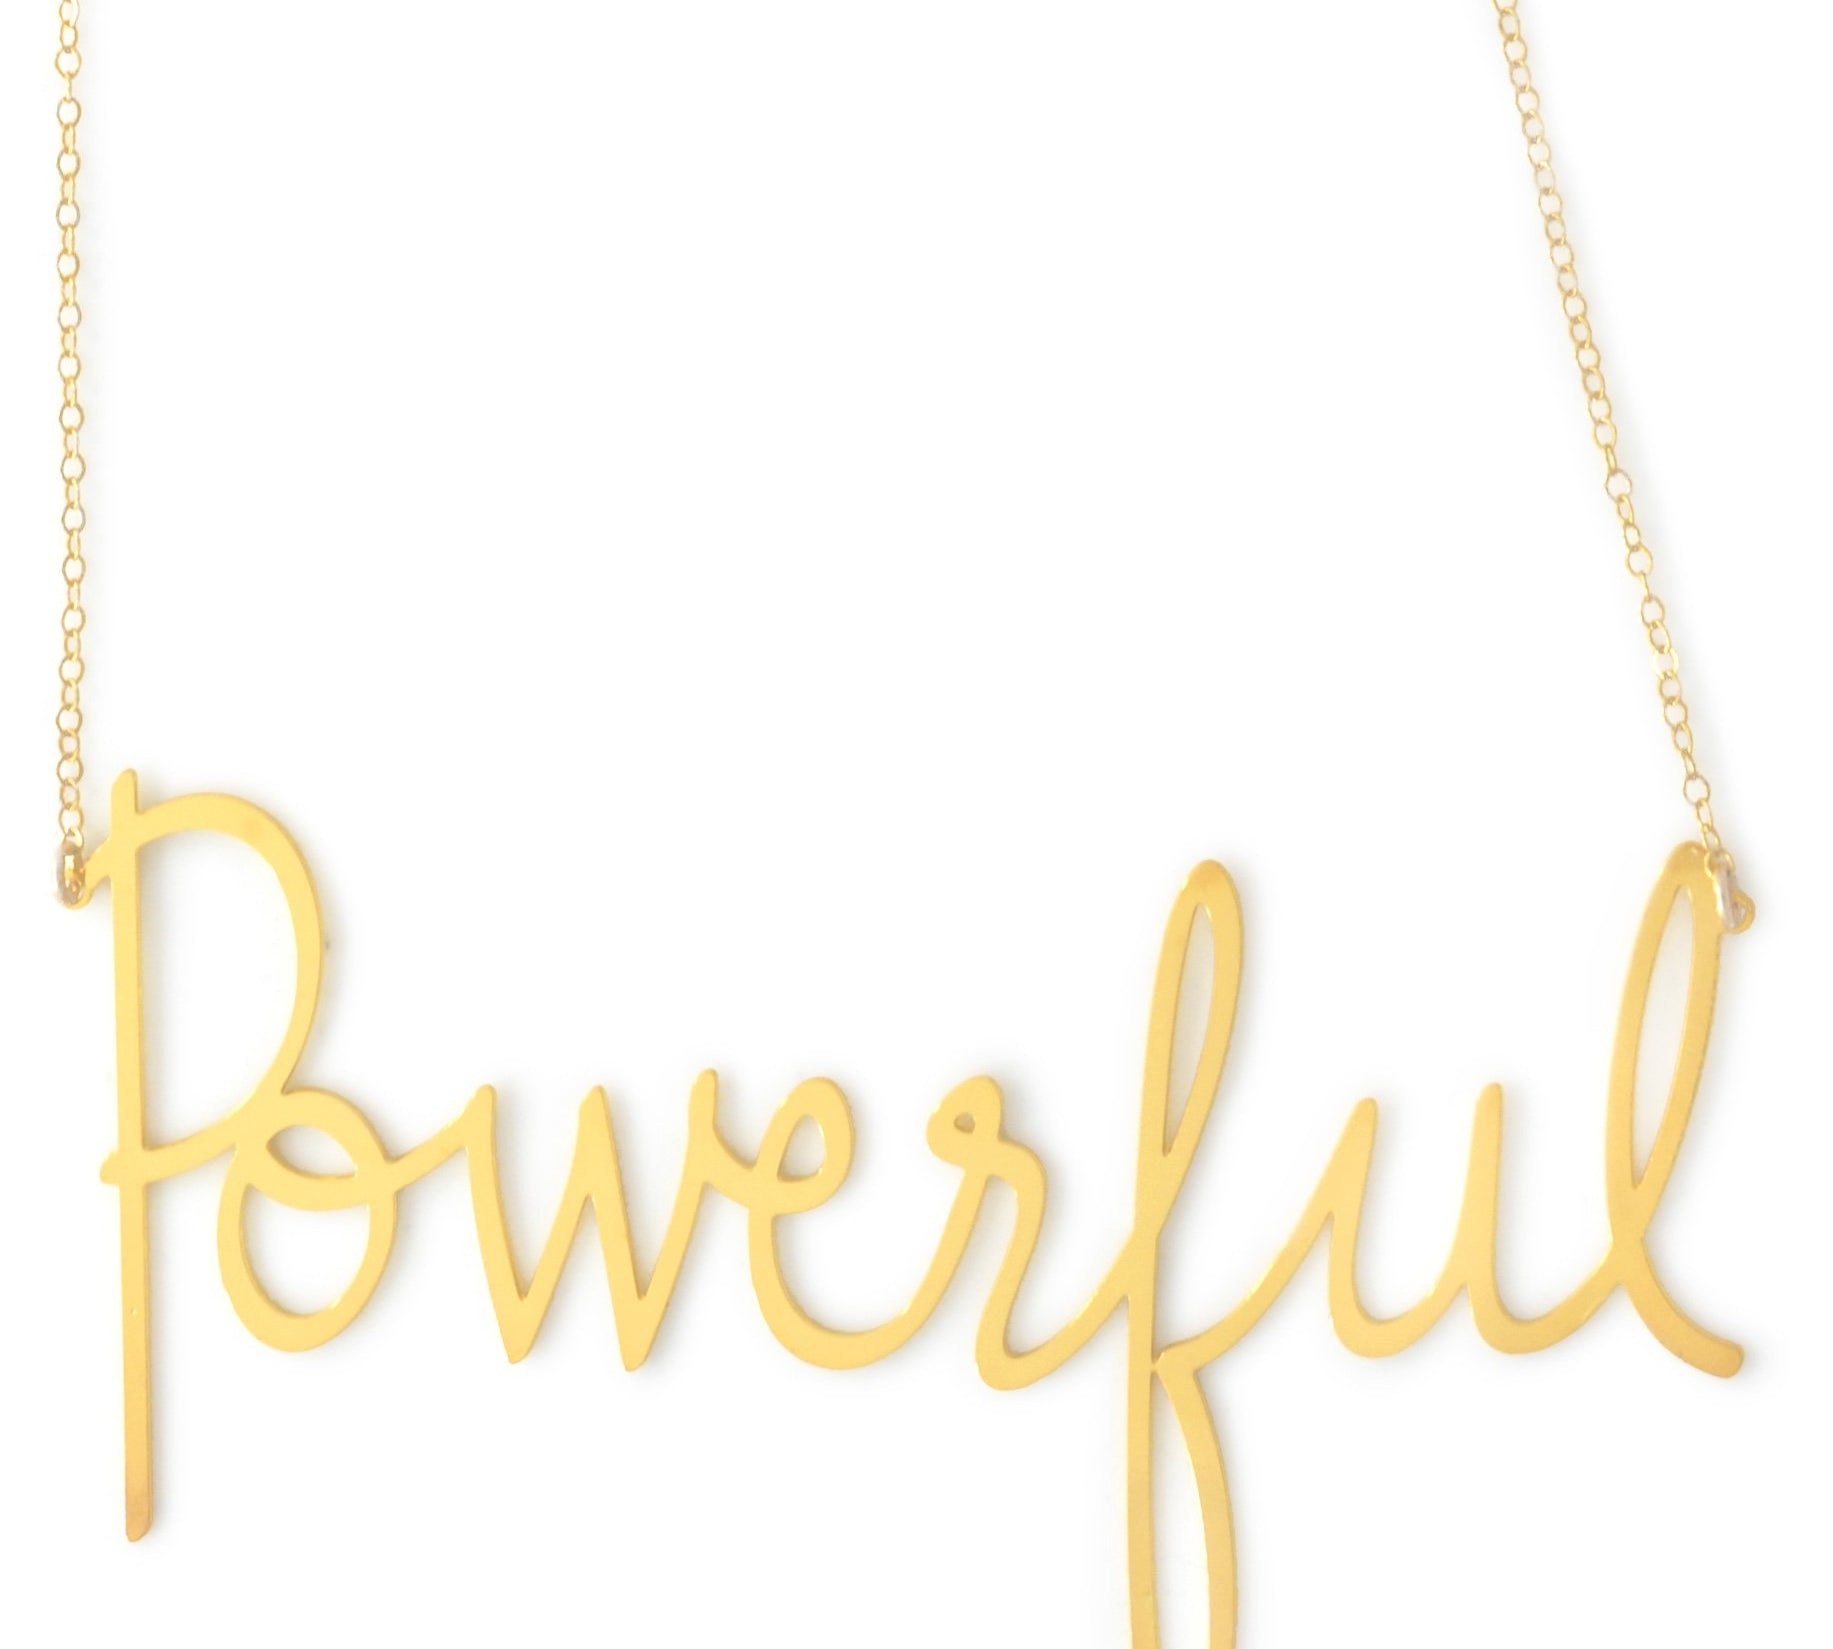 Powerful Necklace - High Quality, Affordable, Hand Written, Empowering, Self Love, Mantra Word Necklace - Available in Gold and Silver - Small and Large Sizes - Made in USA - Brevity Jewelry